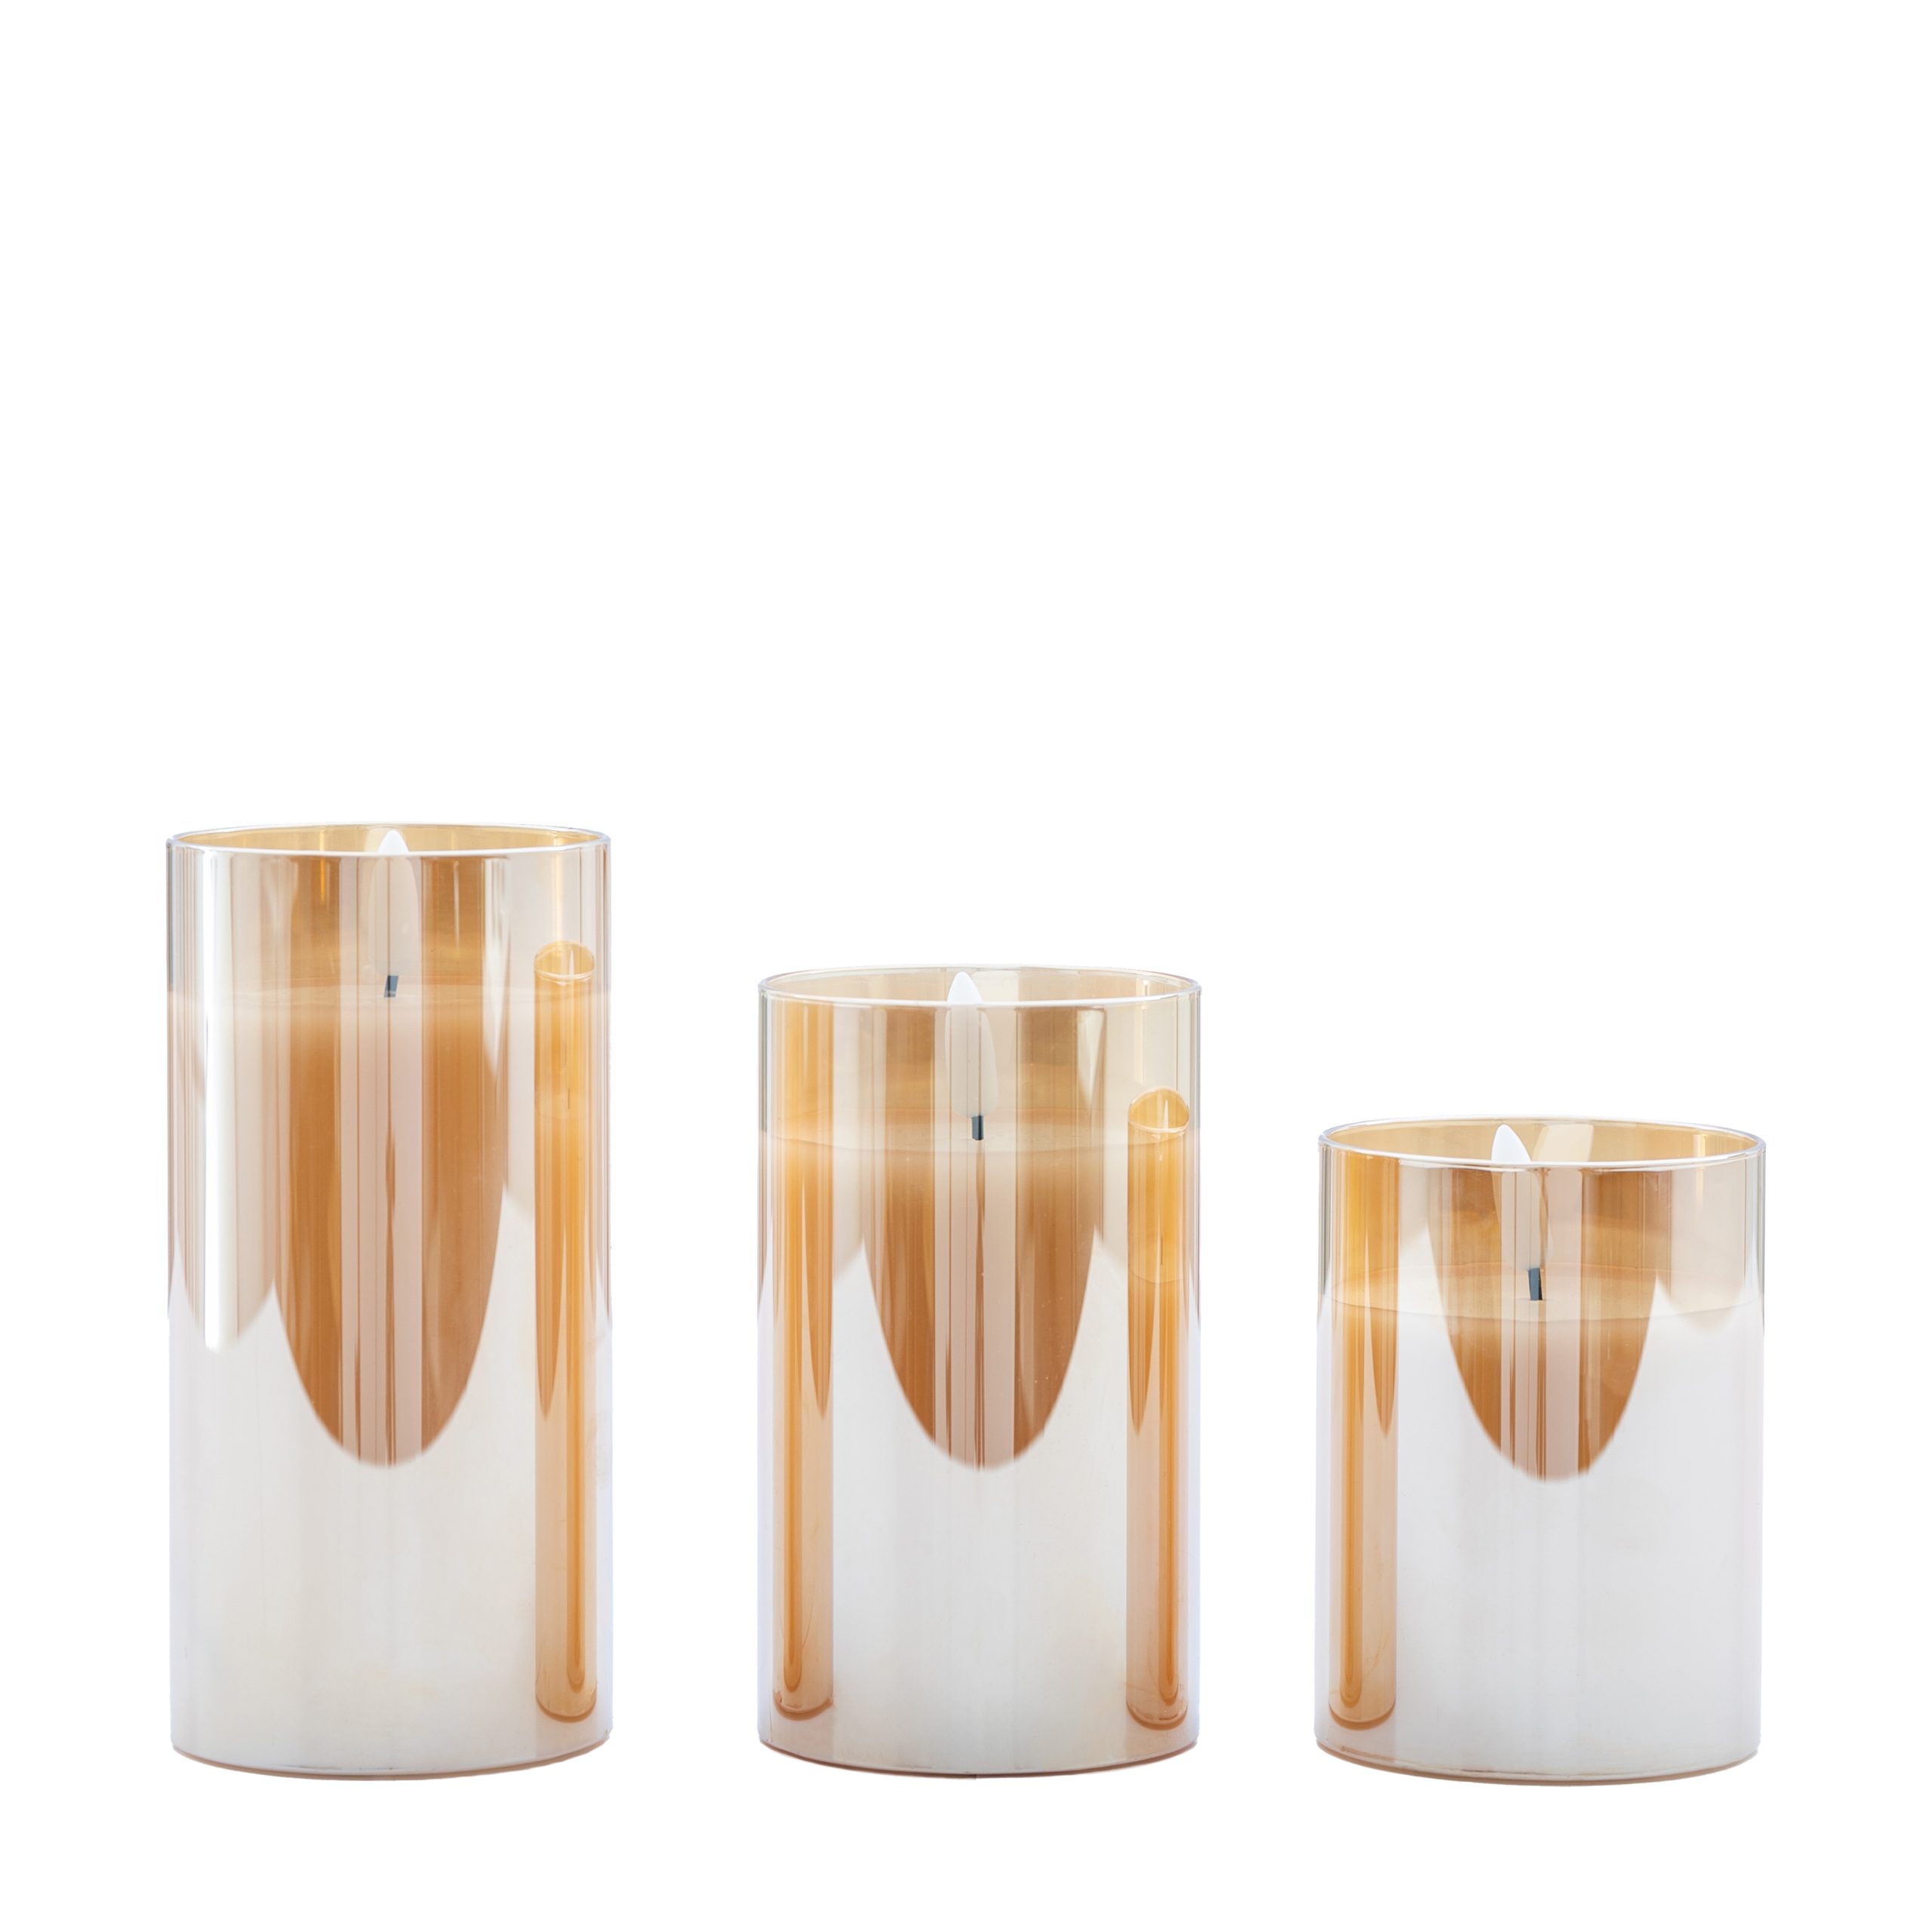 Gallery Direct LED Candle Gold Votive (Set of 3)